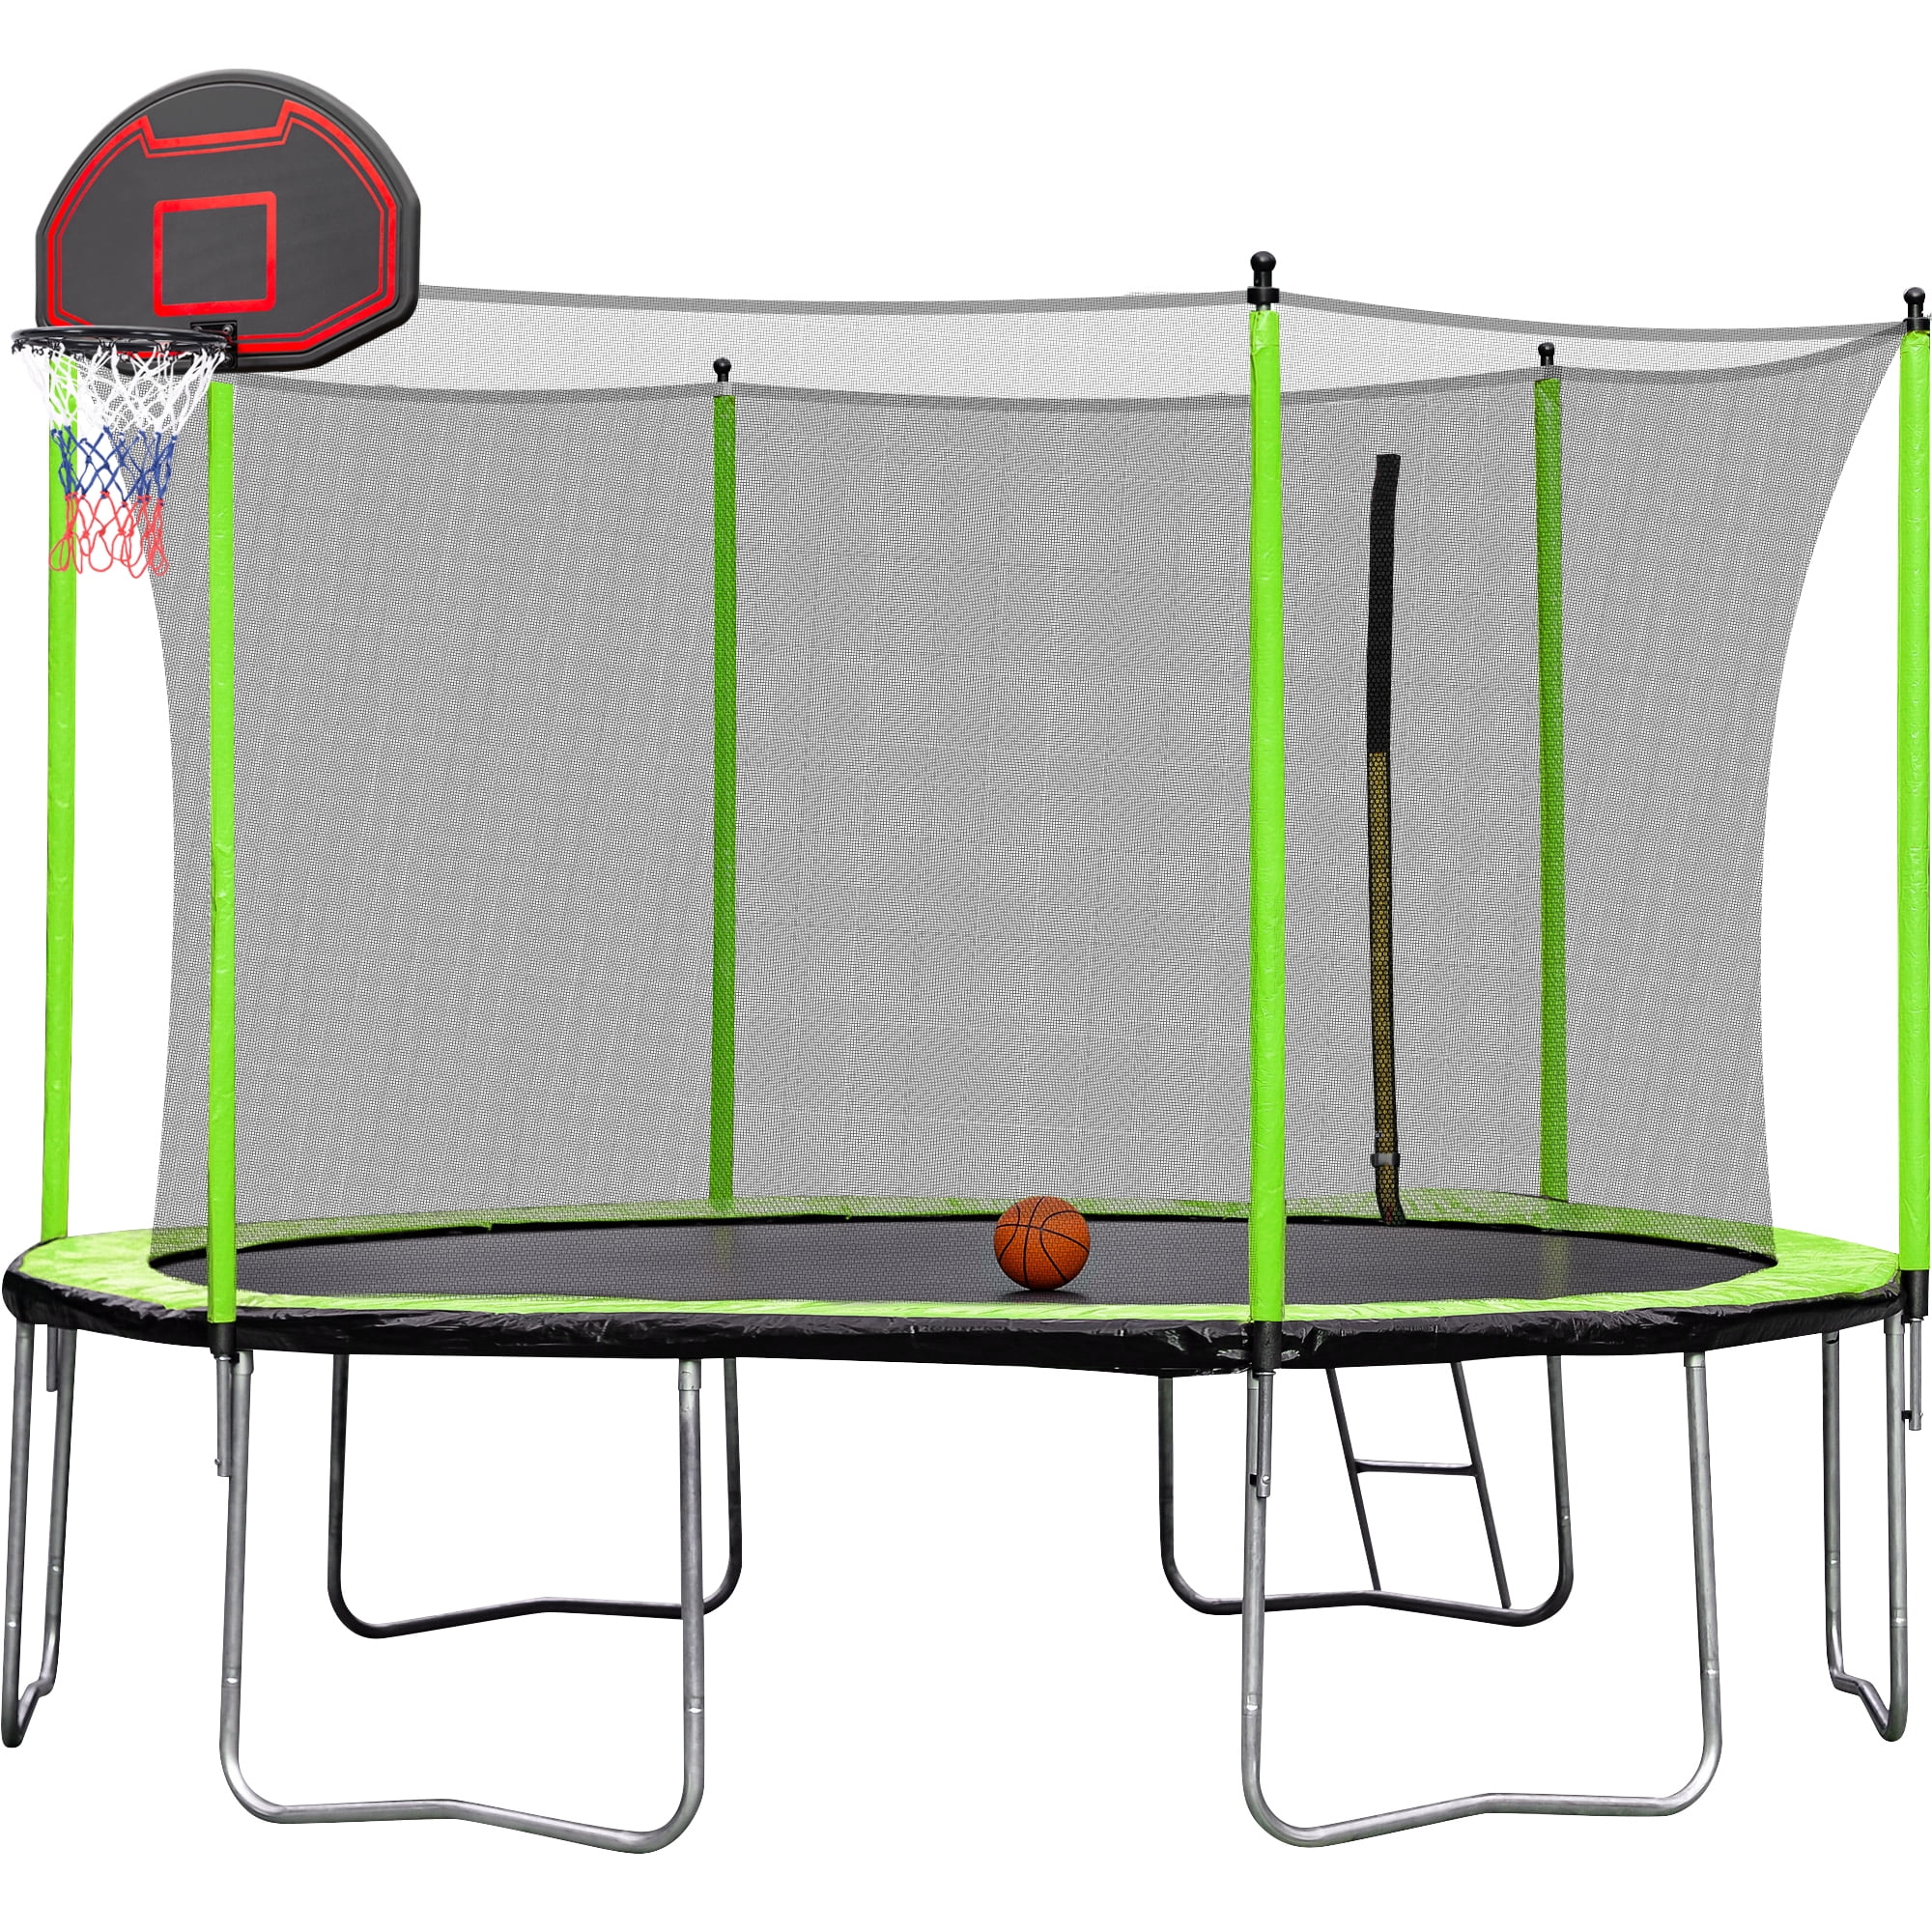 GoolRC 14FT Trampoline with Basketball Hoop Inflator and Ladder(Inner Safety Enclosure) Green